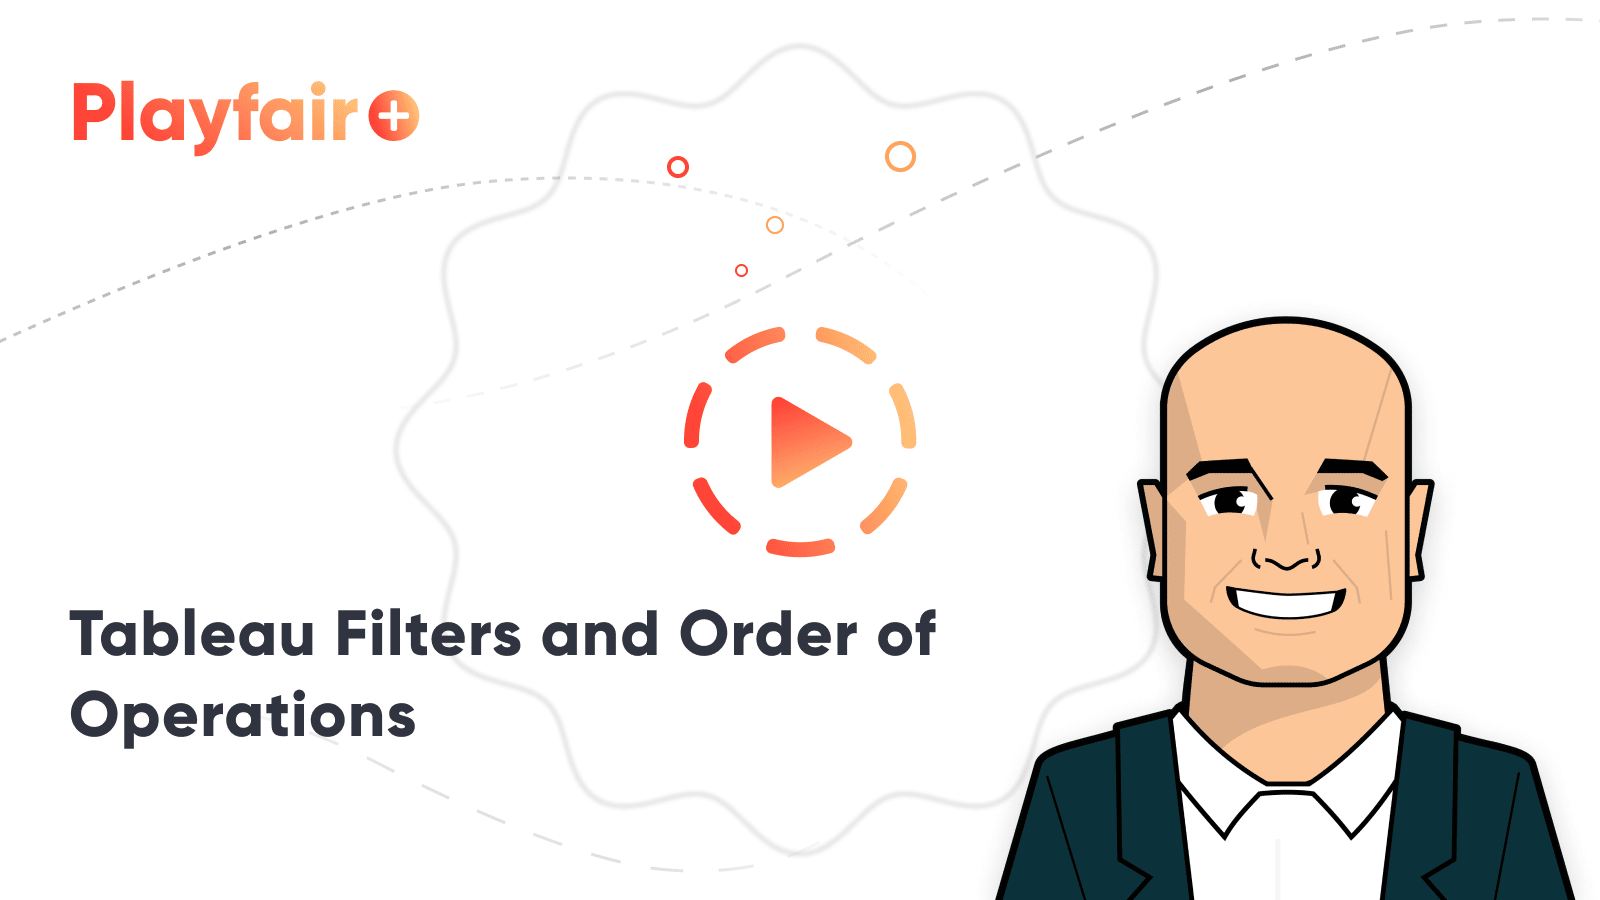 Tableau Filters and Order of Operations